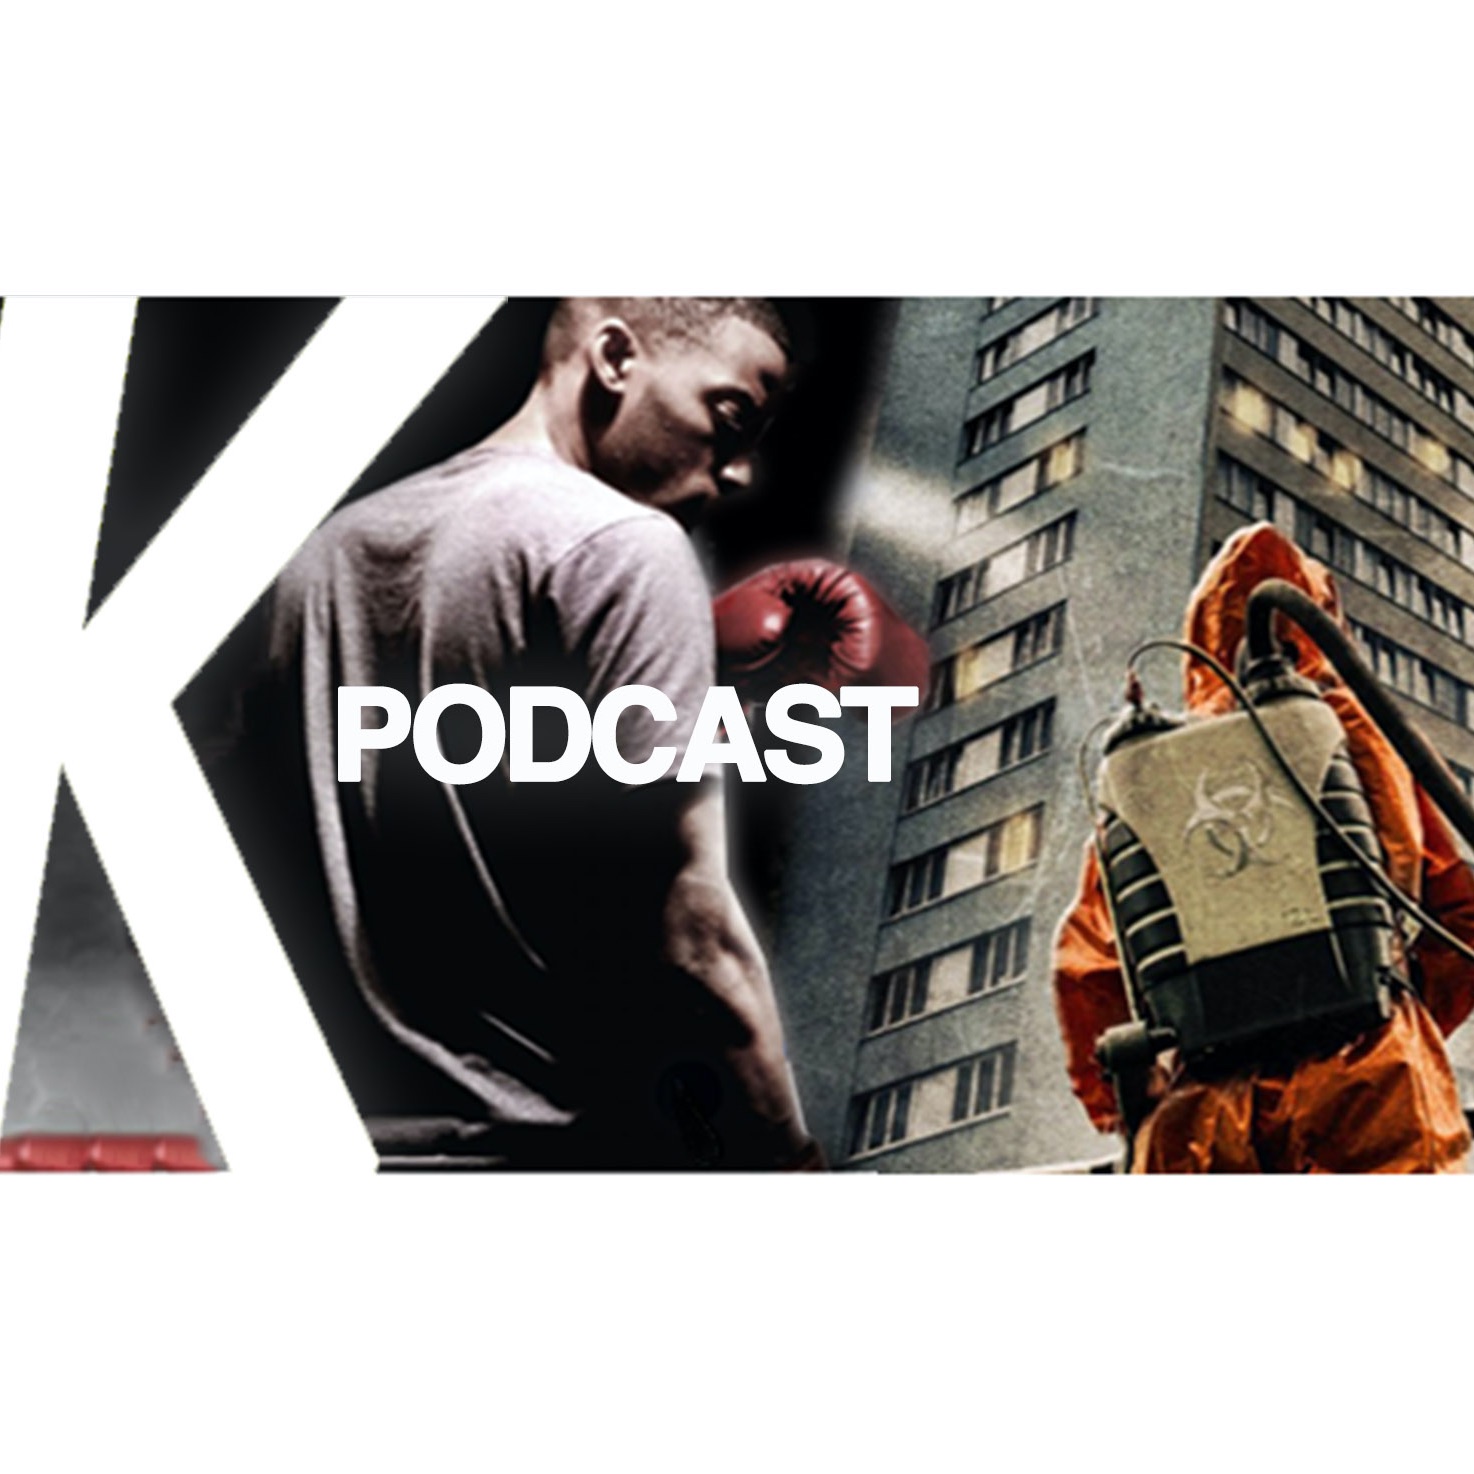 K FILM PODCAST with Neil West and Dan Turner